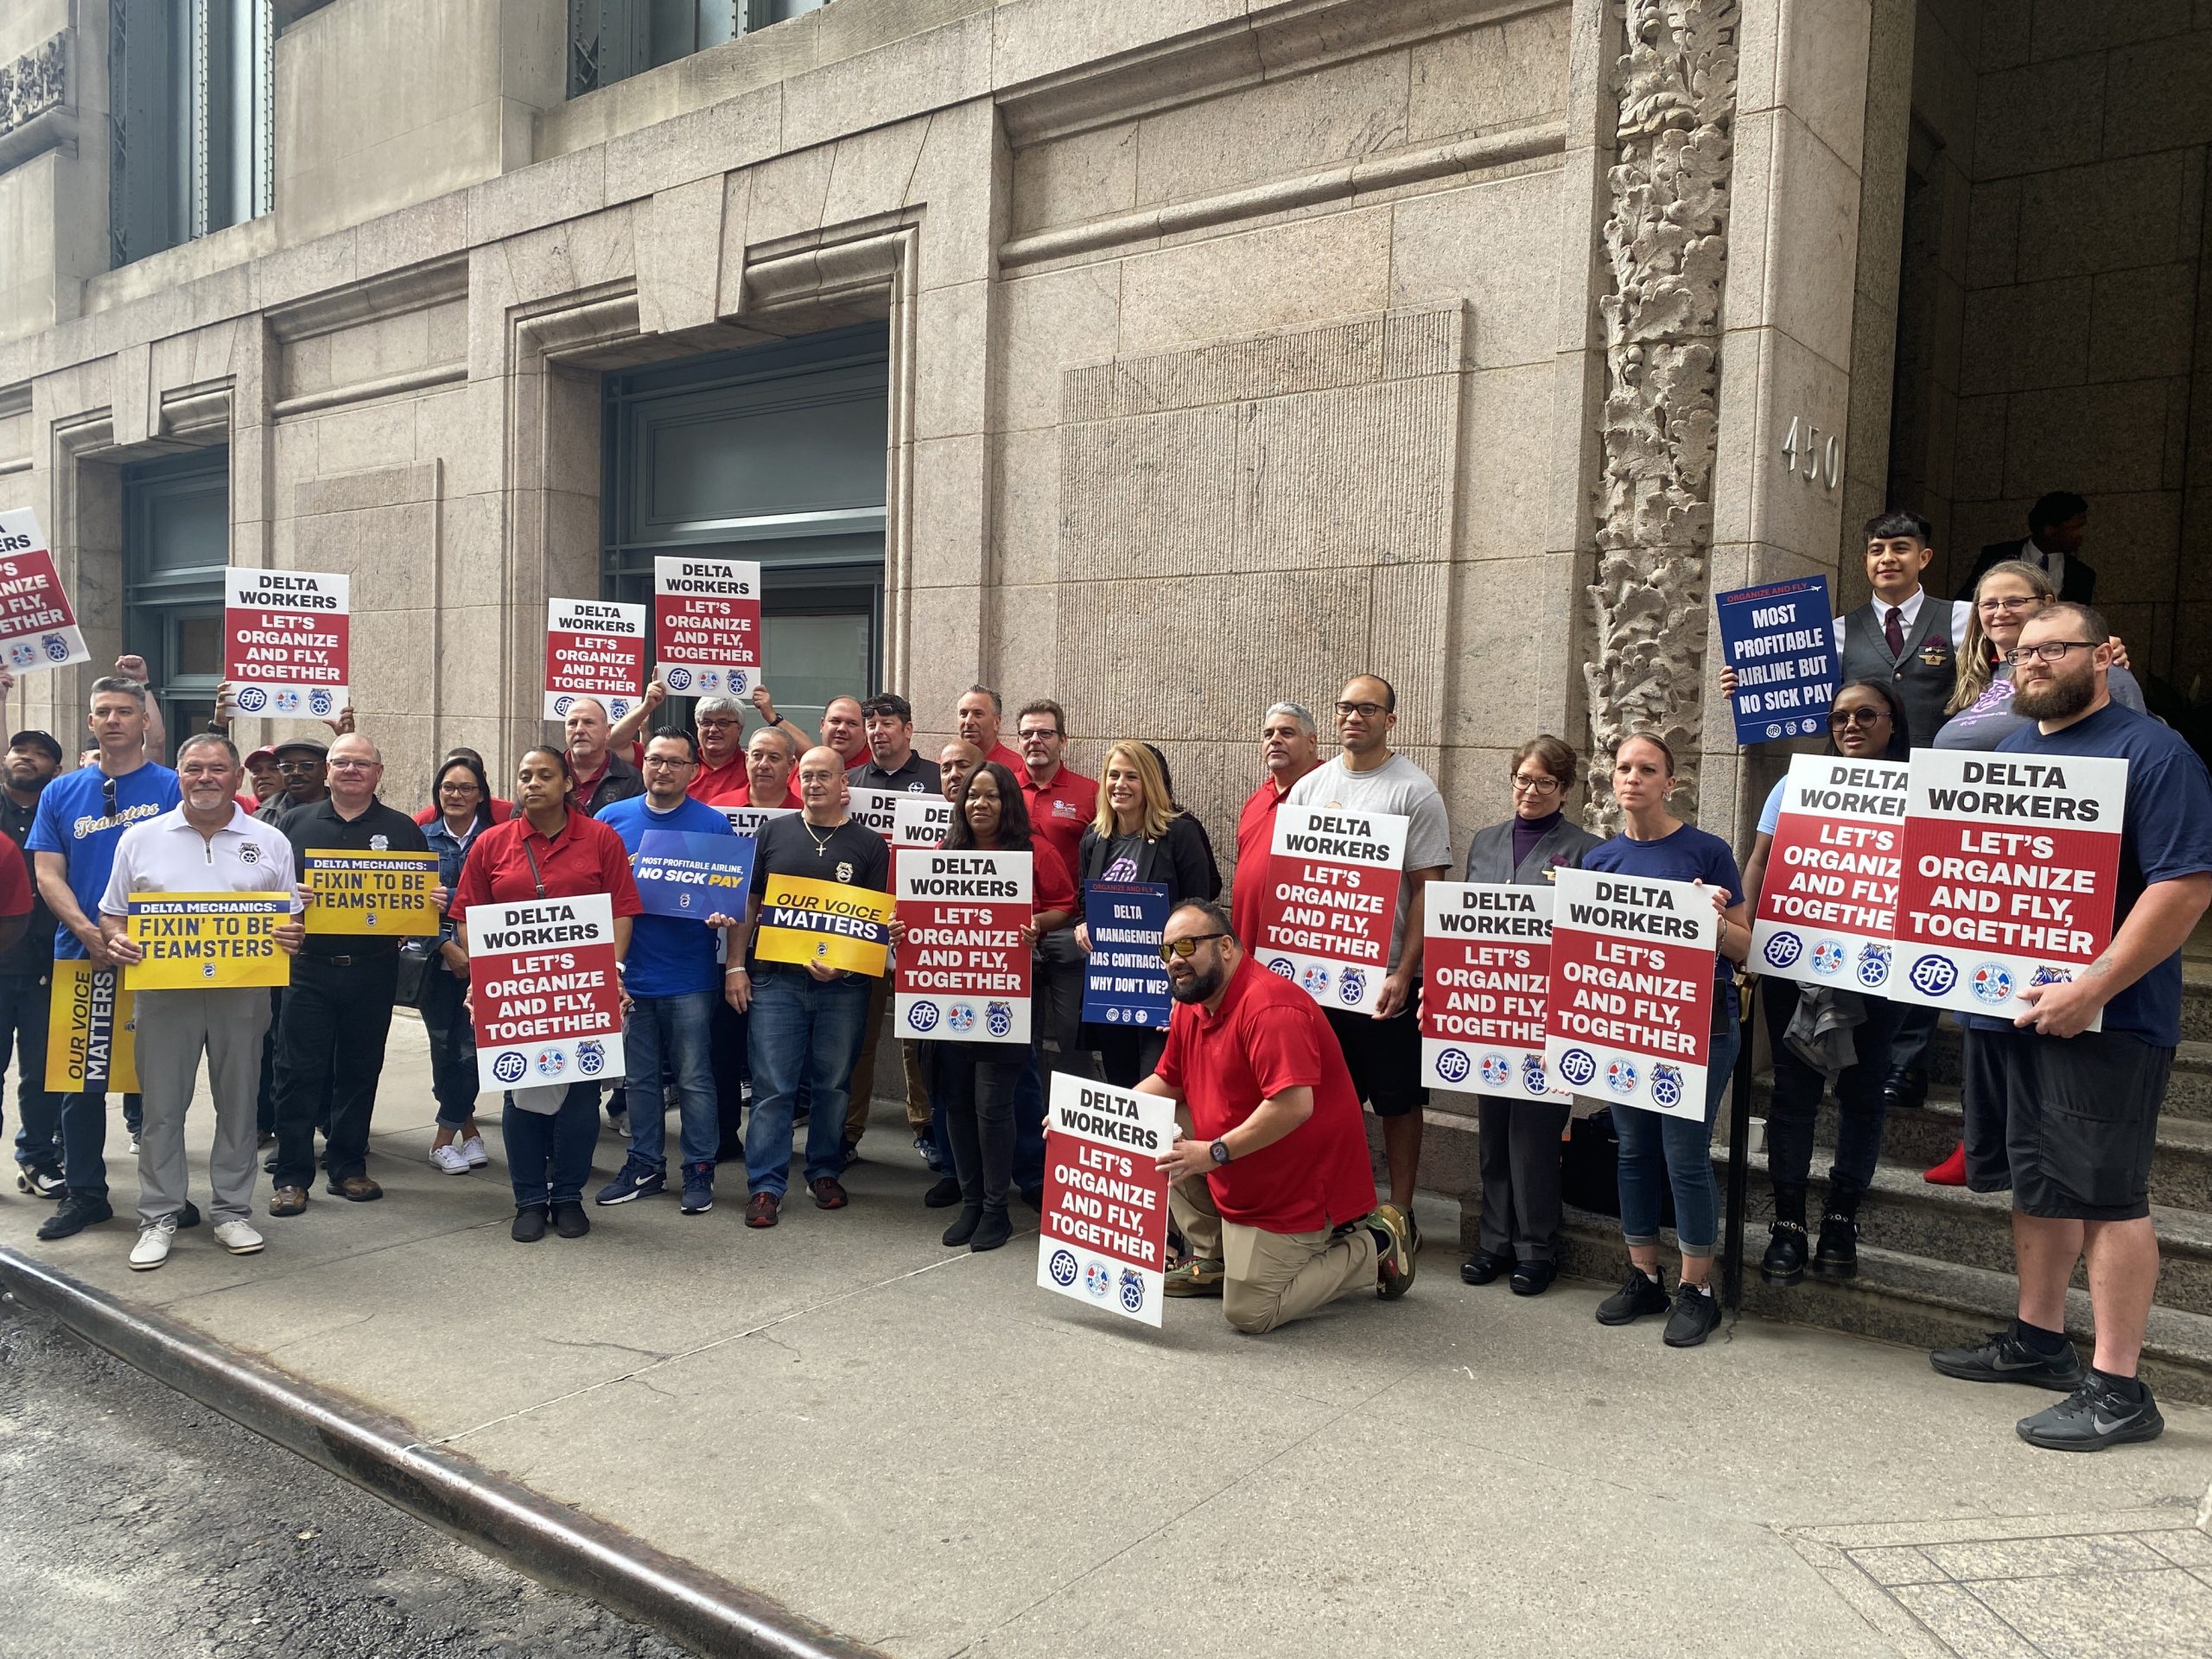 Delta Workers Call for Free and Fair Union Elections at Shareholder Meeting